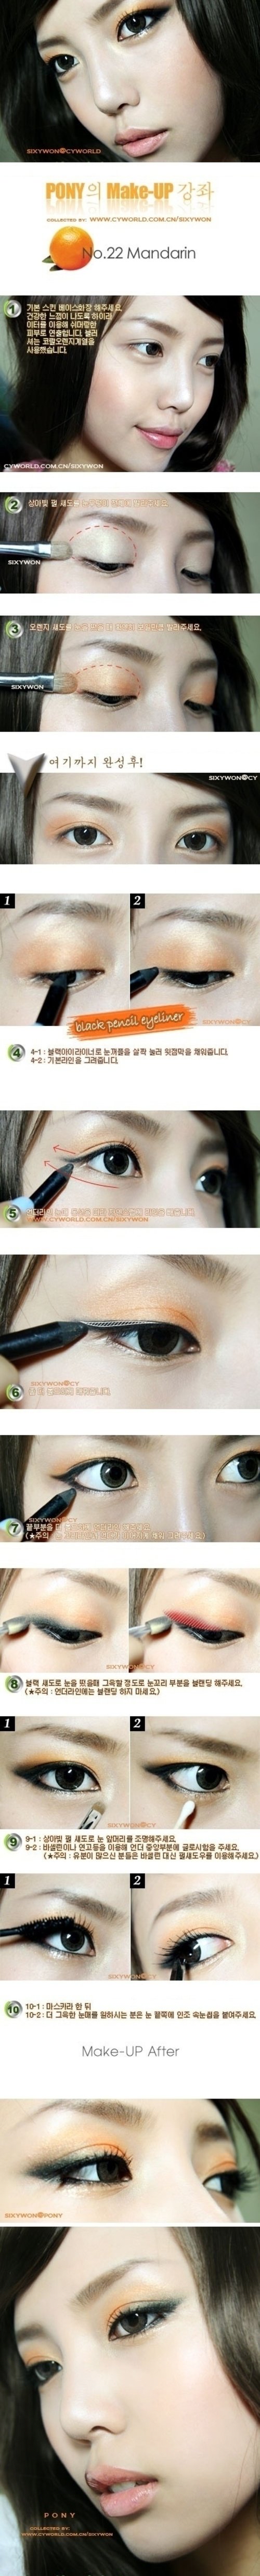 Orange eyeshadow can look amazing when blended with a dark color on the outer corners#CIDEyeMakeupTutorial